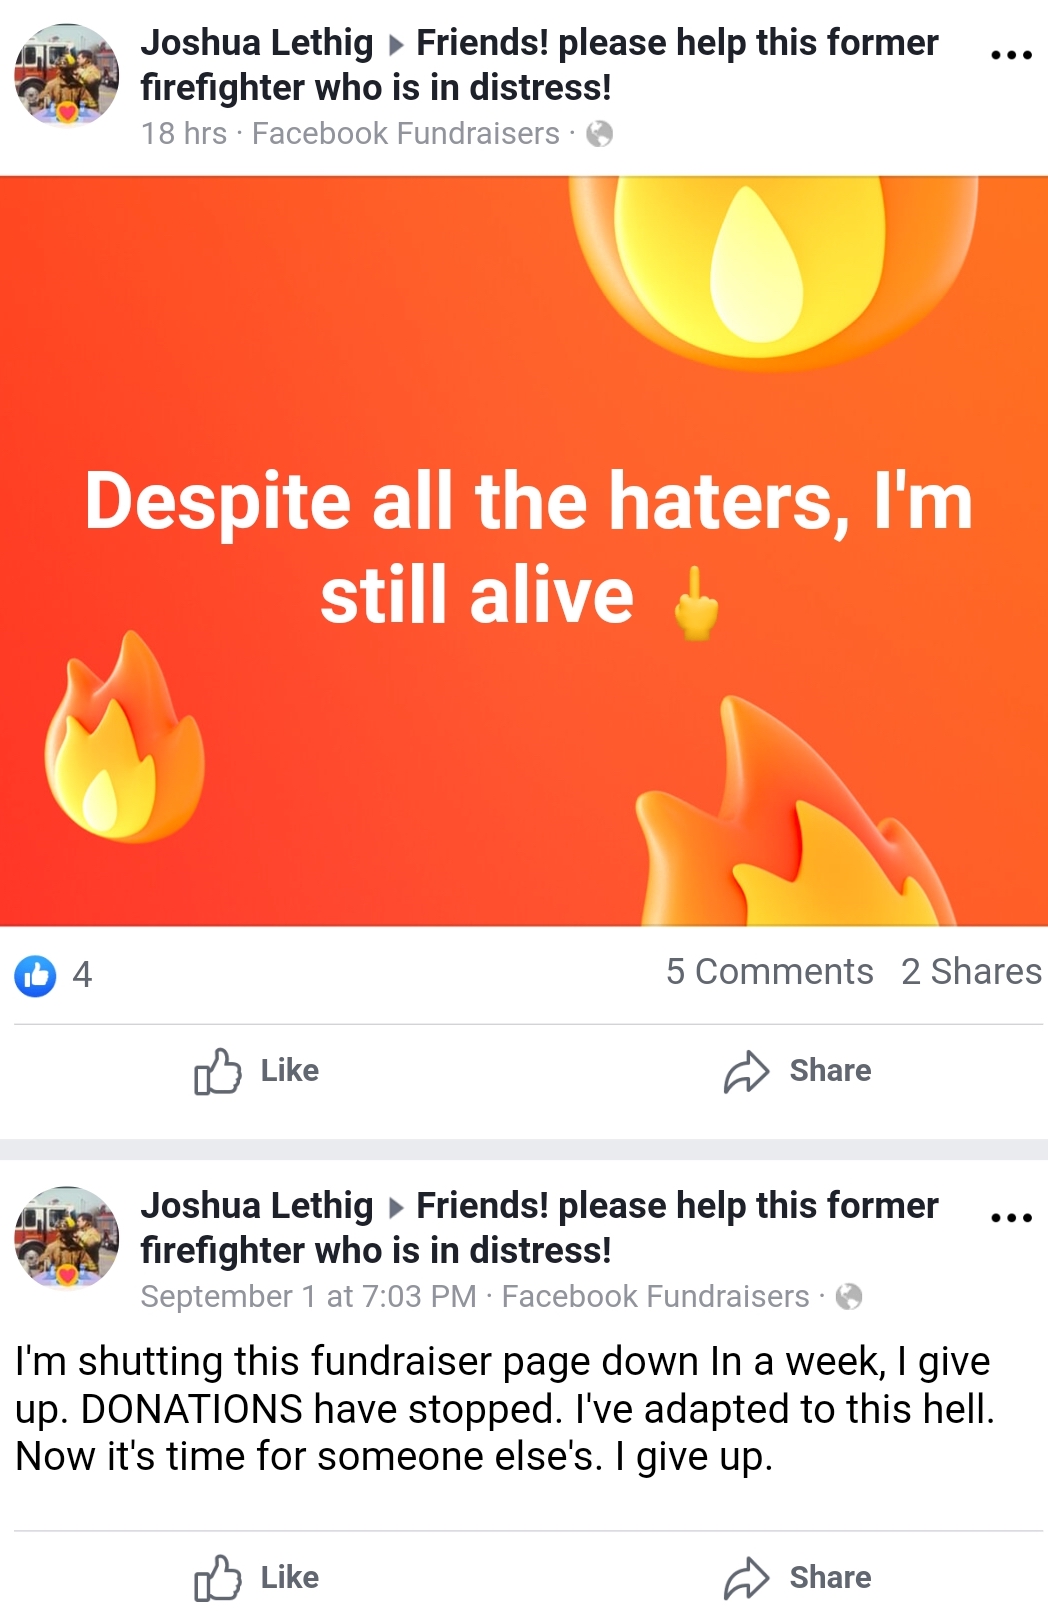 orange - Joshua Lethig Friends! please help this former firefighter who is in distress! 18 hrs. Facebook Fundraisers Despite all the haters, I'm still alive 5 2 Joshua Lethig Friends! please help this former firefighter who is in distress! September 1 at 